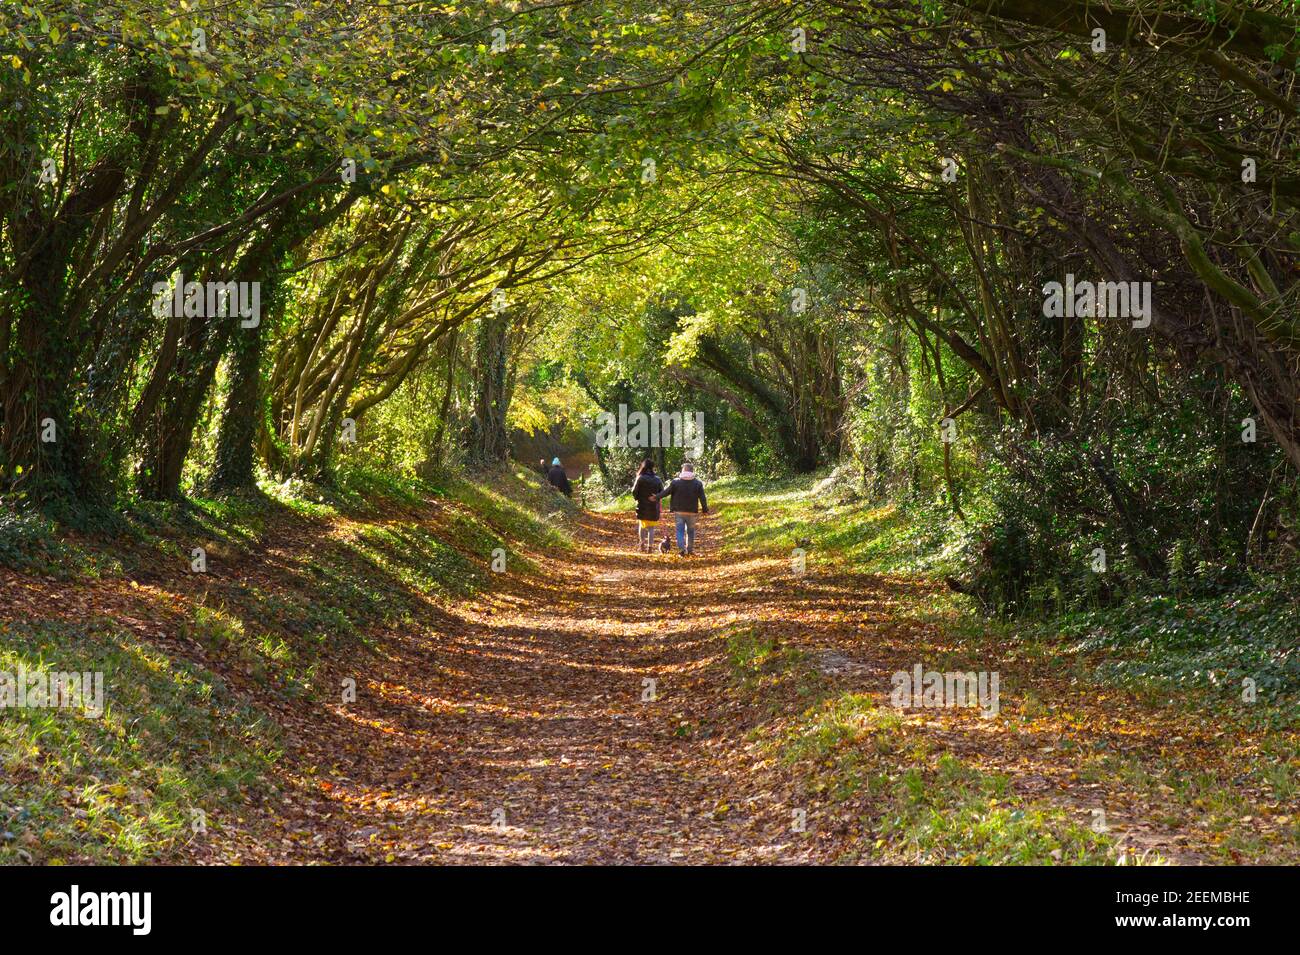 People walking along sunken footpath under trees at Halnaker, near Chichester, West Sussex, England. Autumn with tree colours. Stock Photo